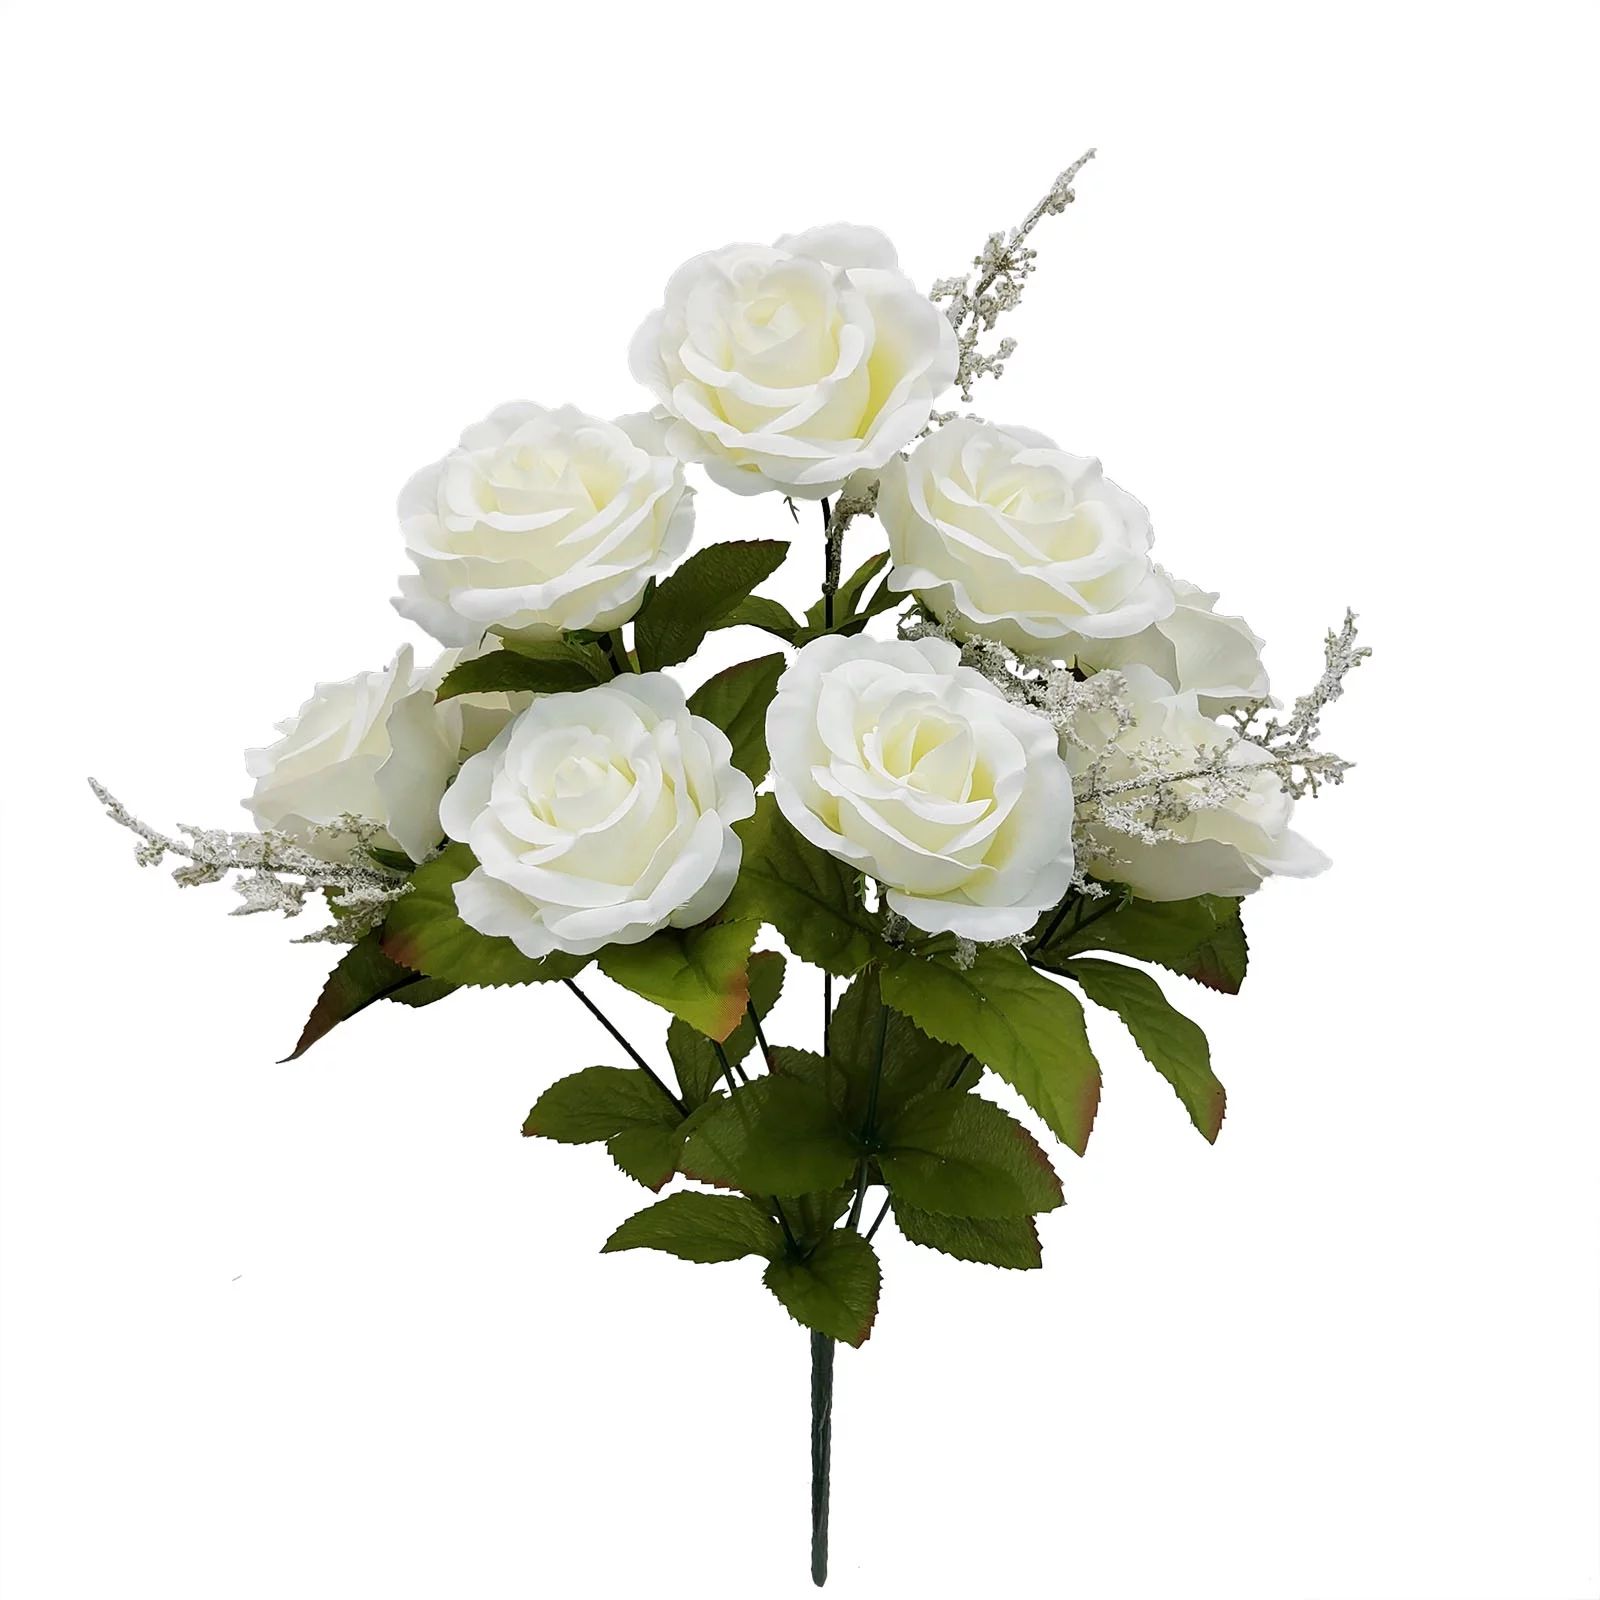 Mainstays Indoor Artificial Rose Floral Bush, White Color, Assembled Height 17.5" | Walmart (US)